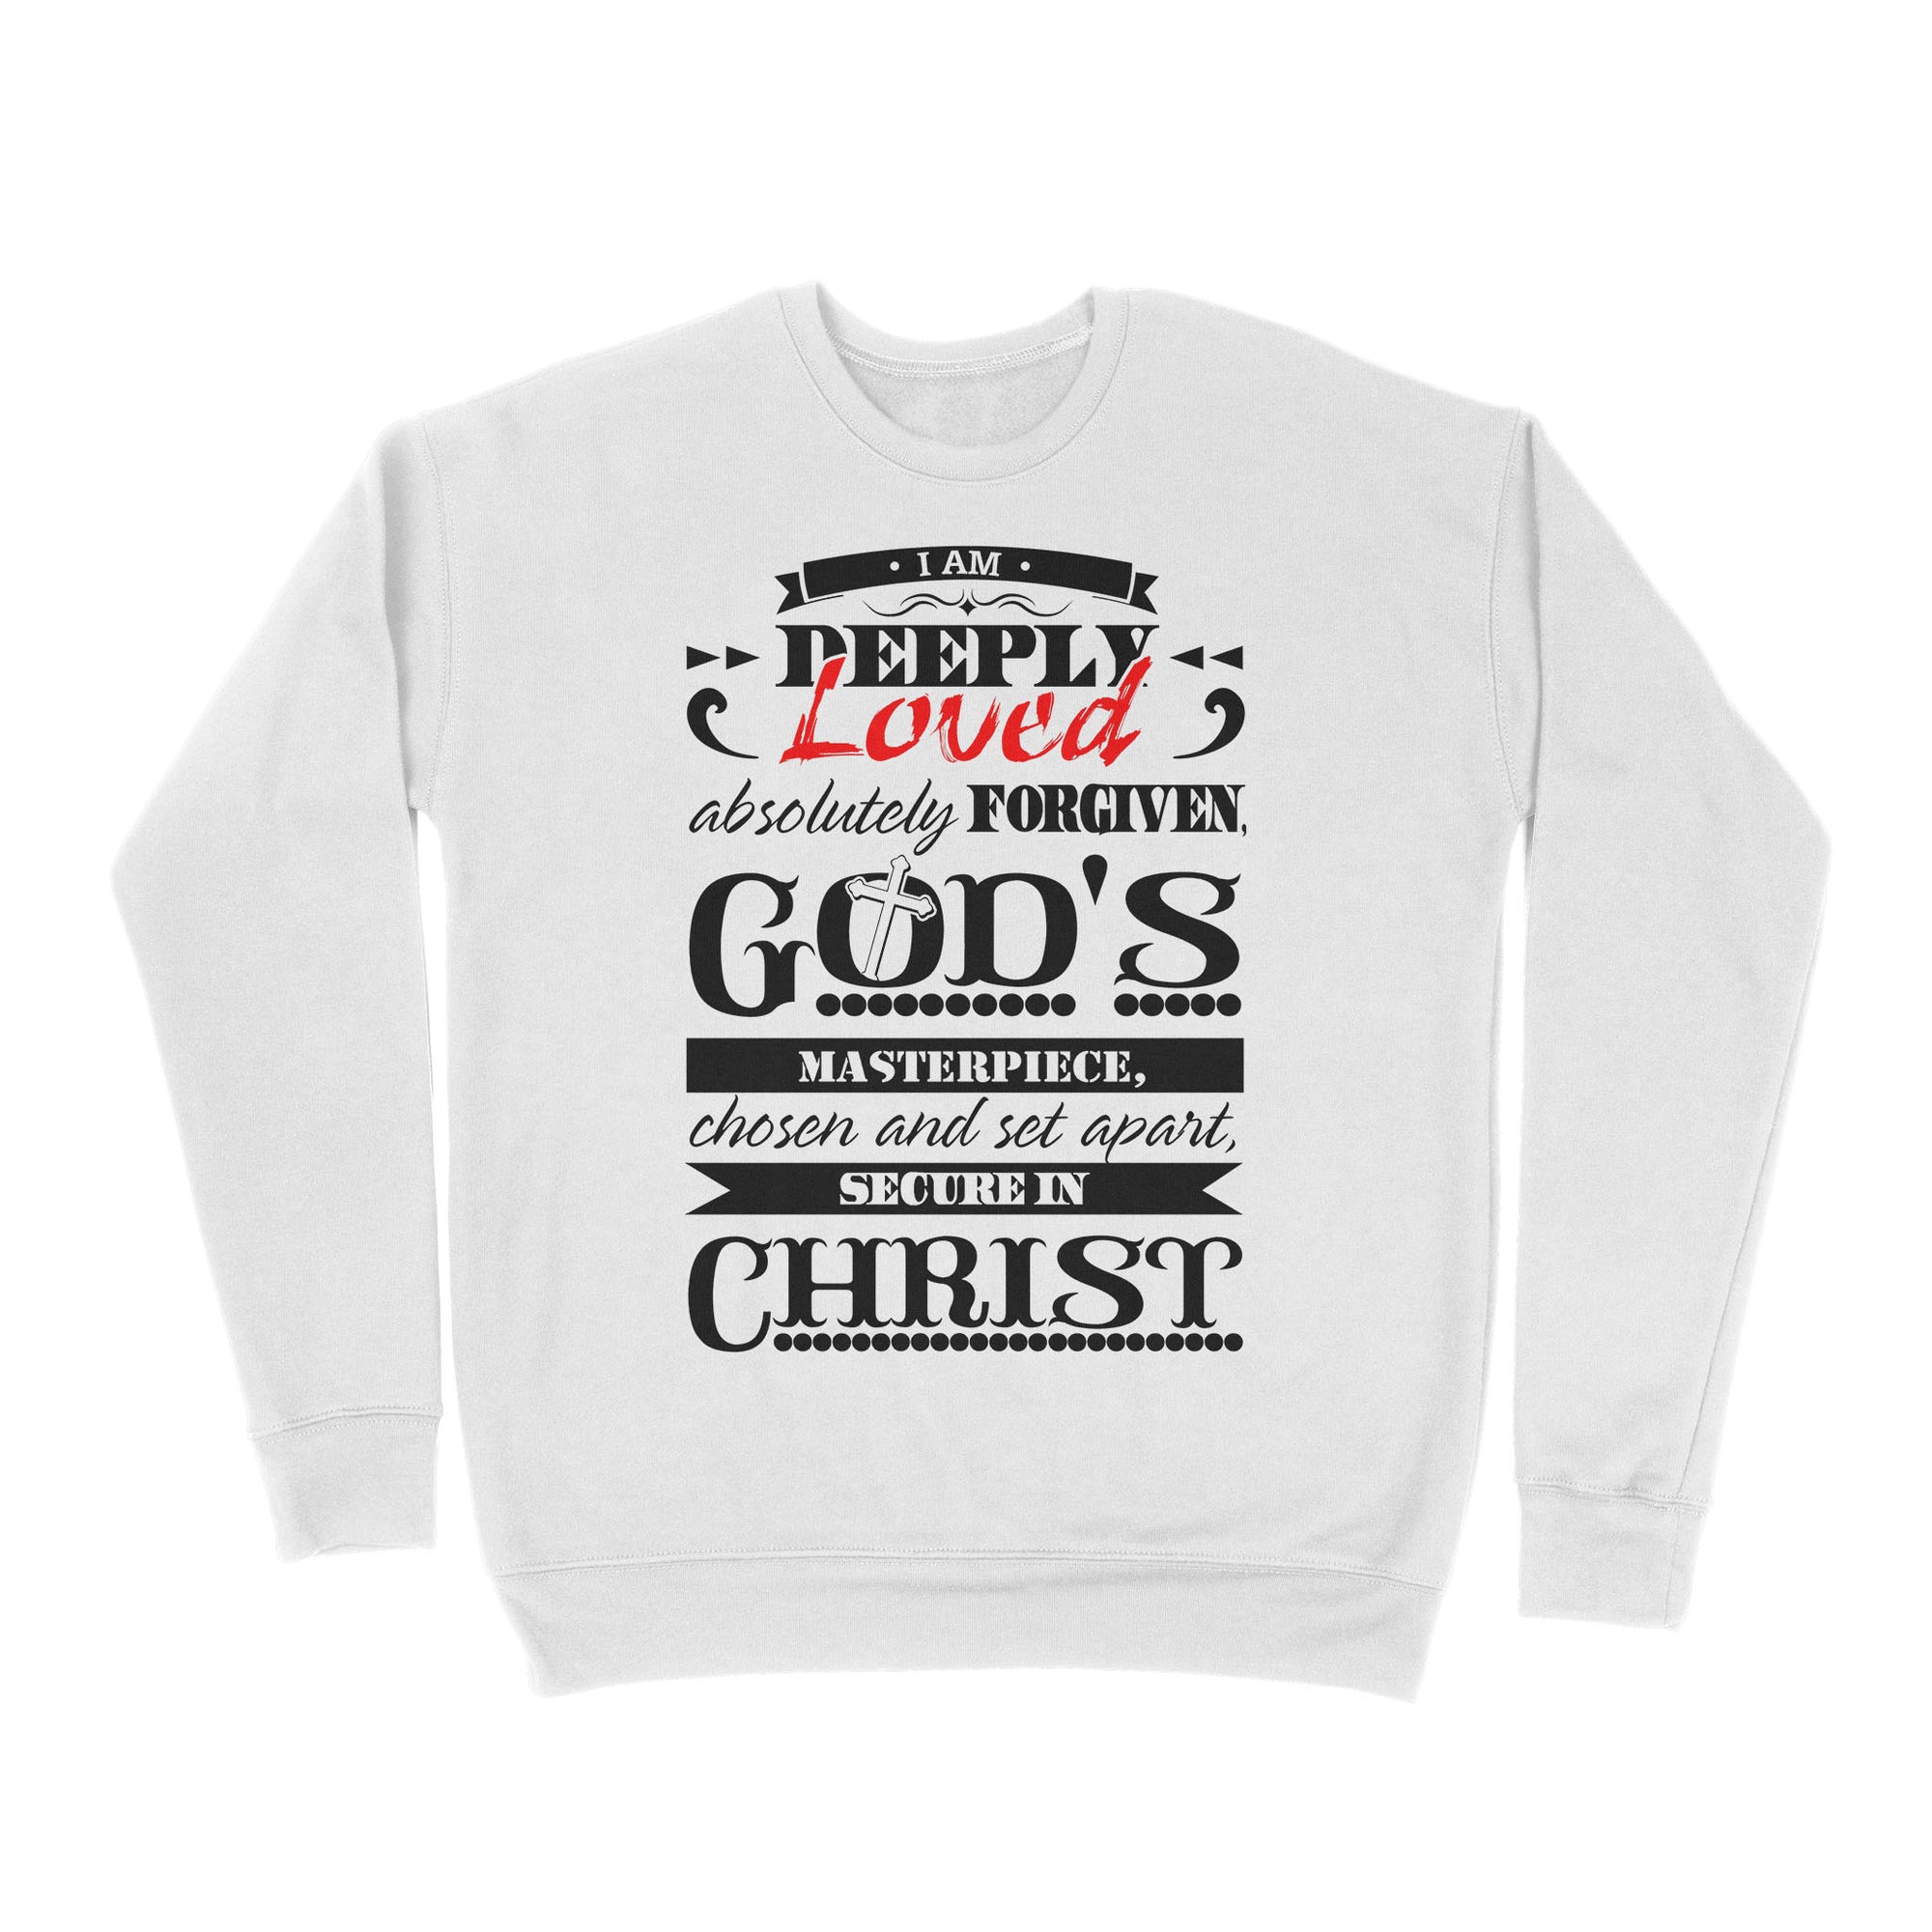 Premium Crew Neck Sweatshirt - I Am Deeply Loved, Absolutely Forgiven, God's Masterpiece, Chosen and Set Apart, Secure in Christ